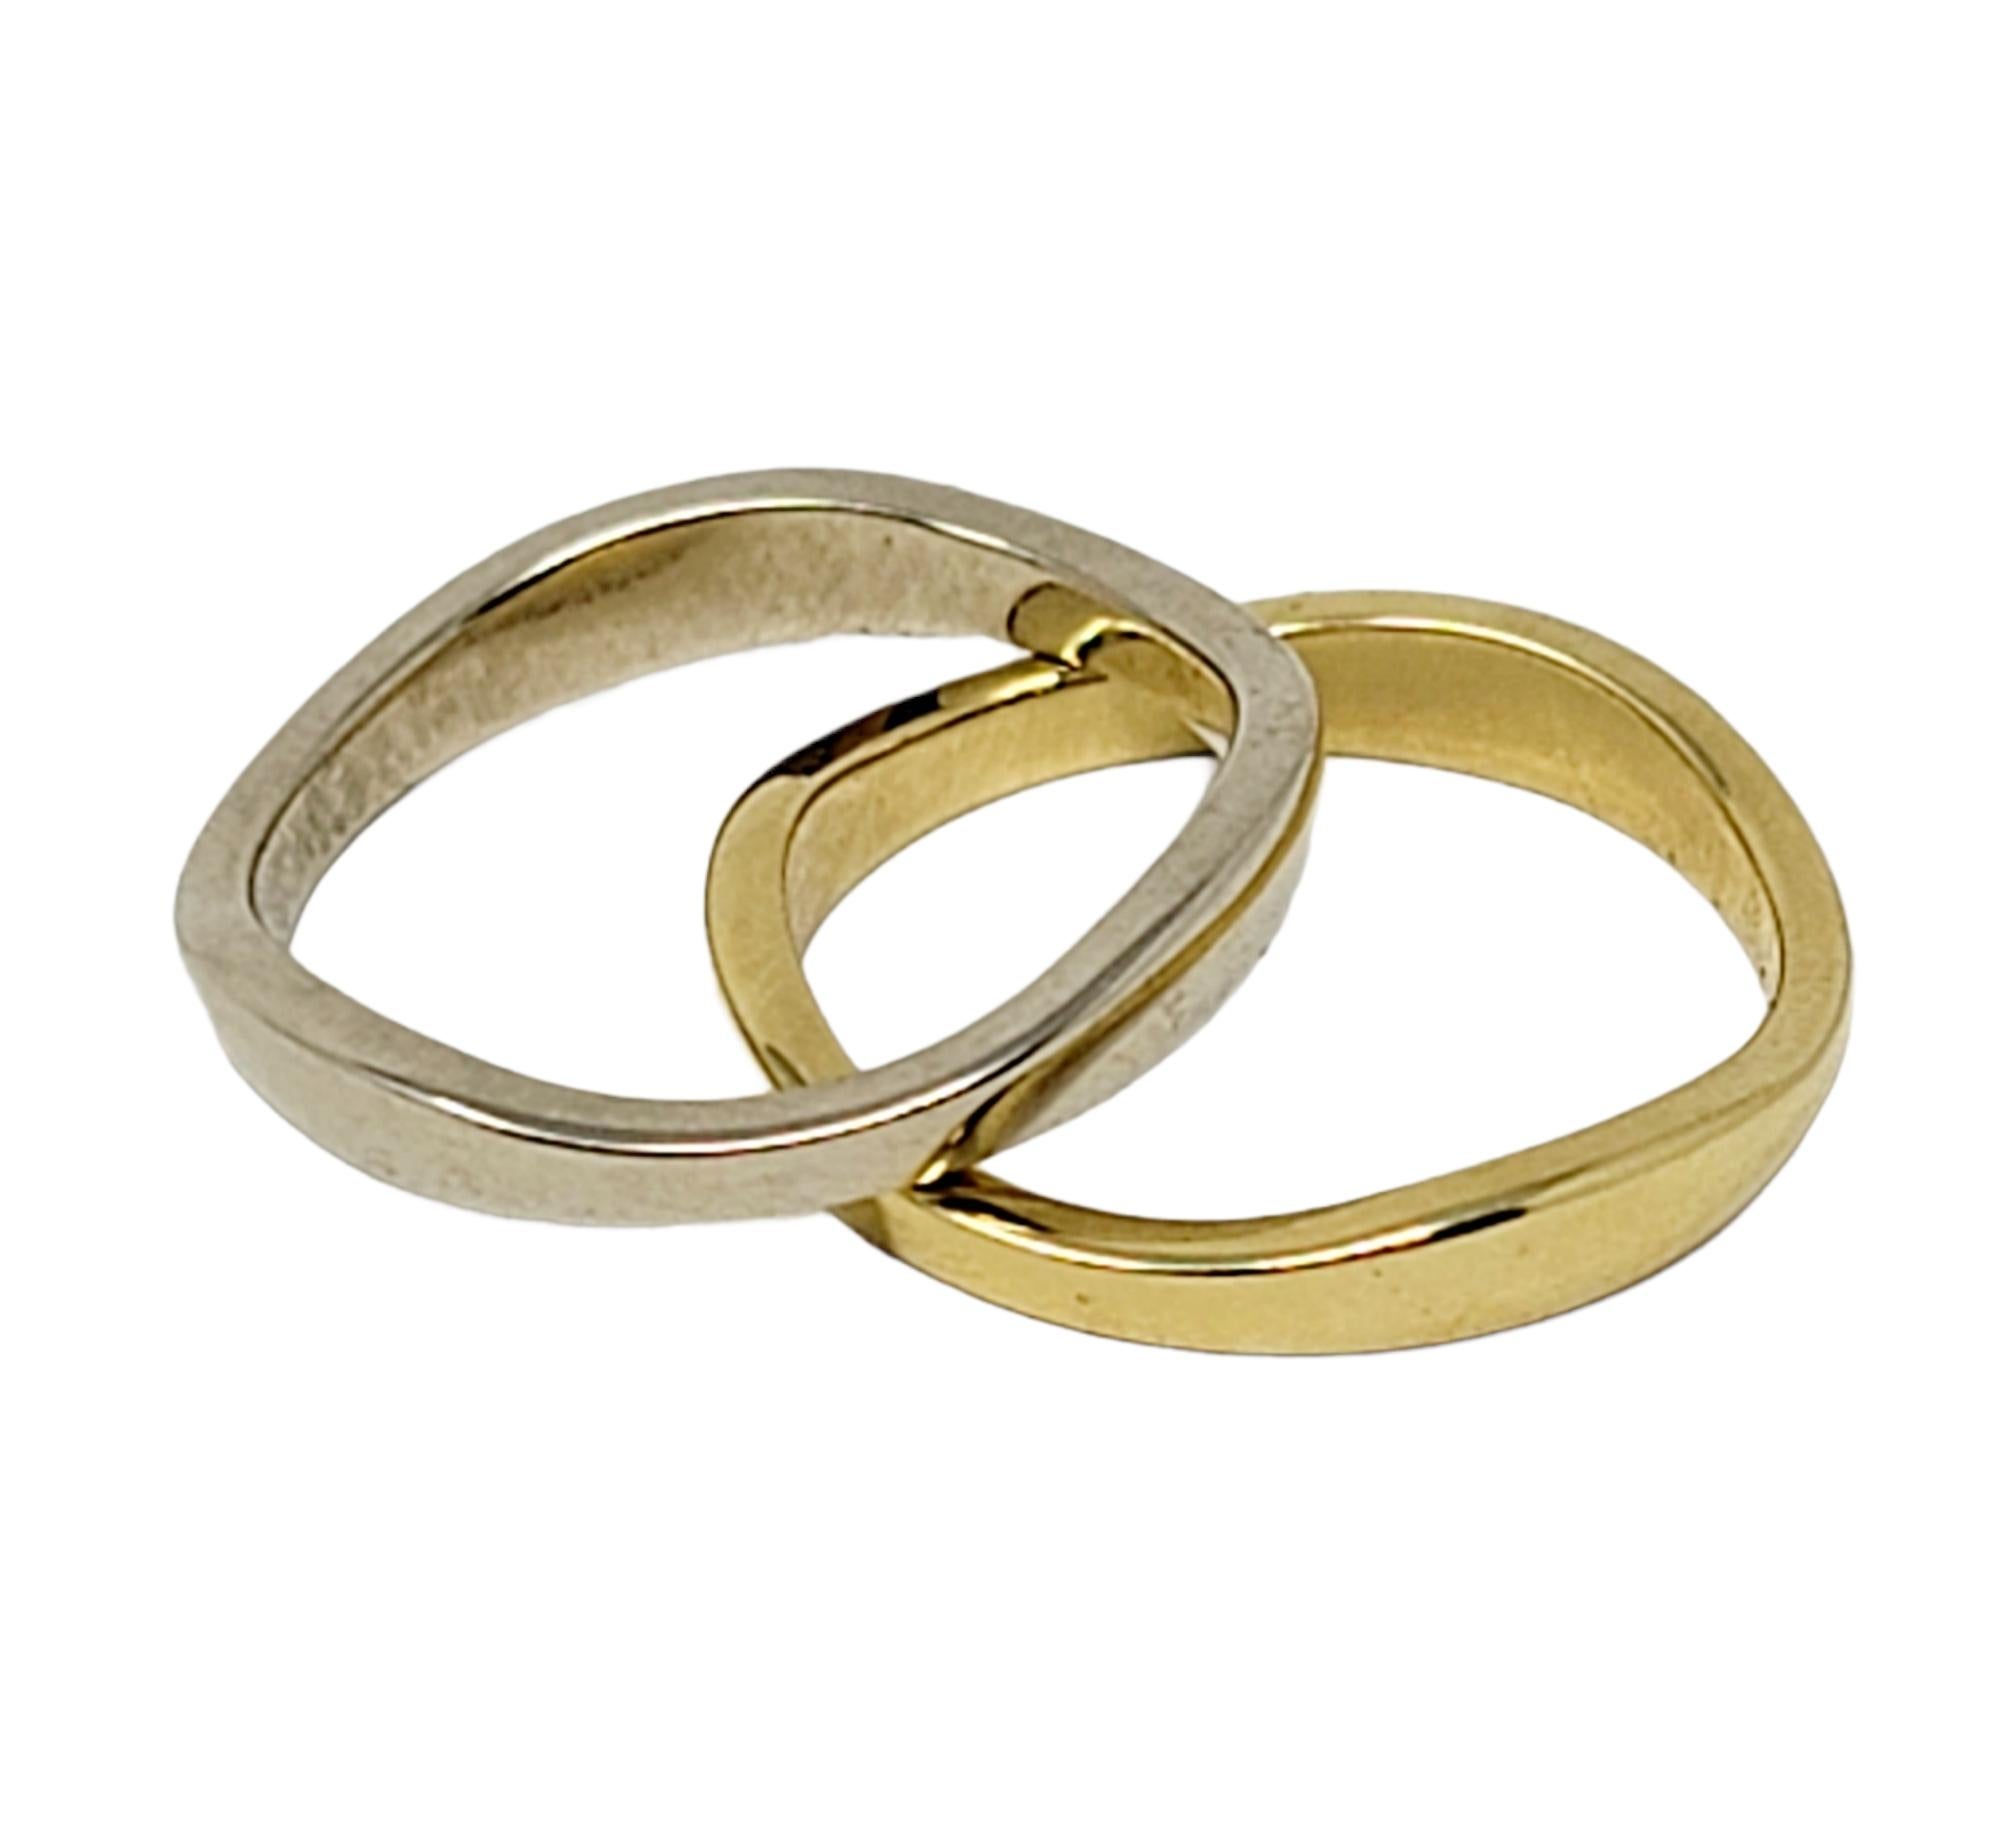 Timeless 'Love Me' multi band ring set by famed jeweler, Cartier. Featuring two individual bands with an undulating design that allows the two rings to fit together. It is the perfect gift for any loved one in your life! Each gold ring is slightly